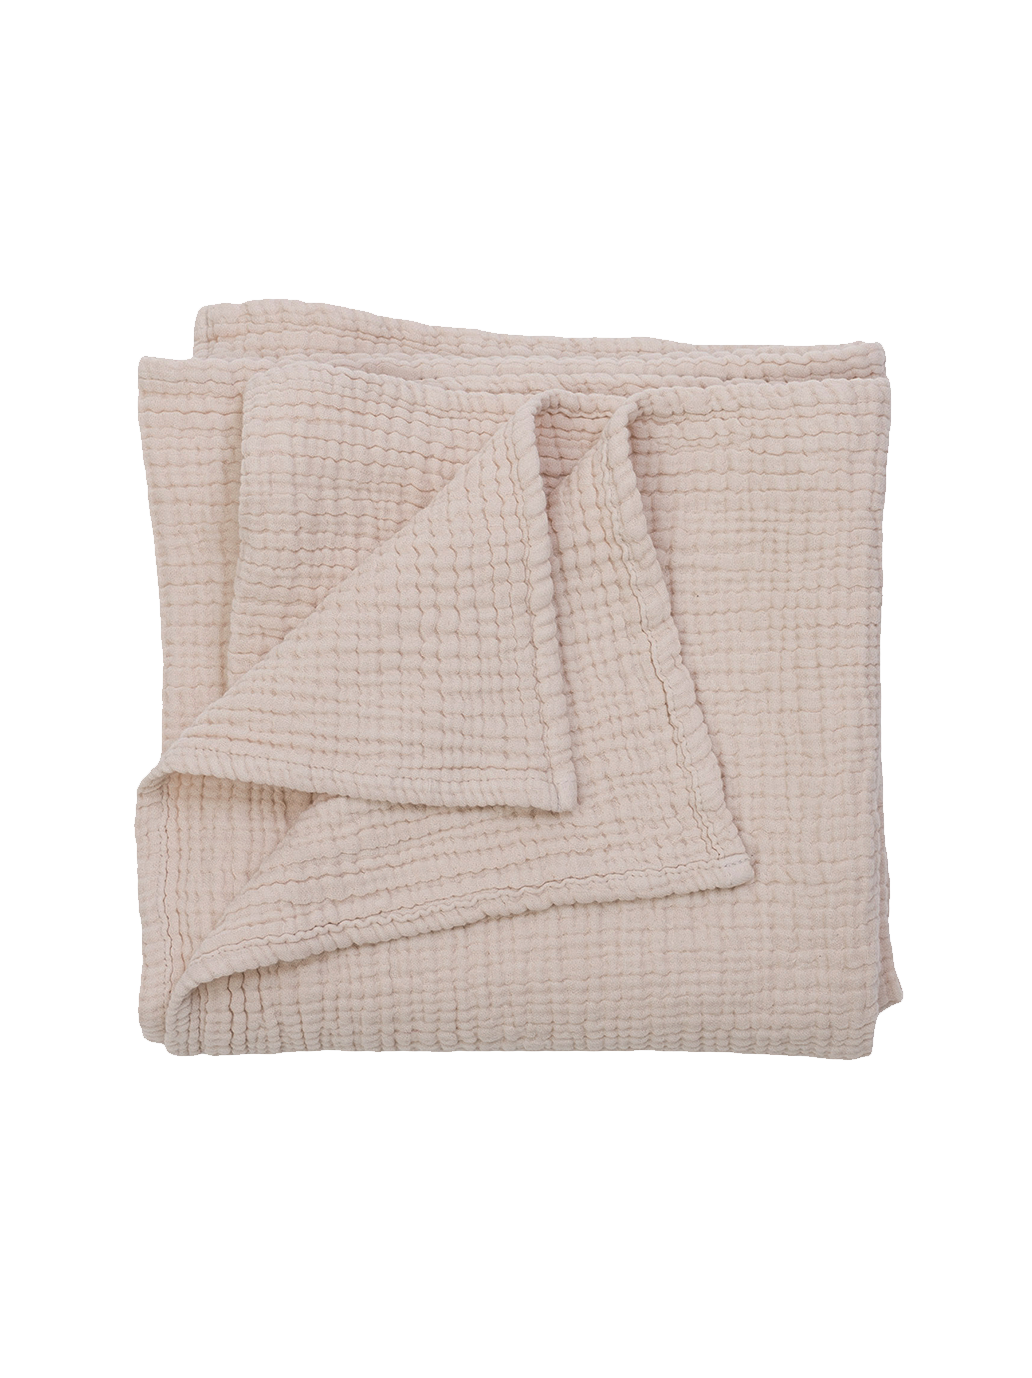 A swaddle made of soft 4-layer muslin